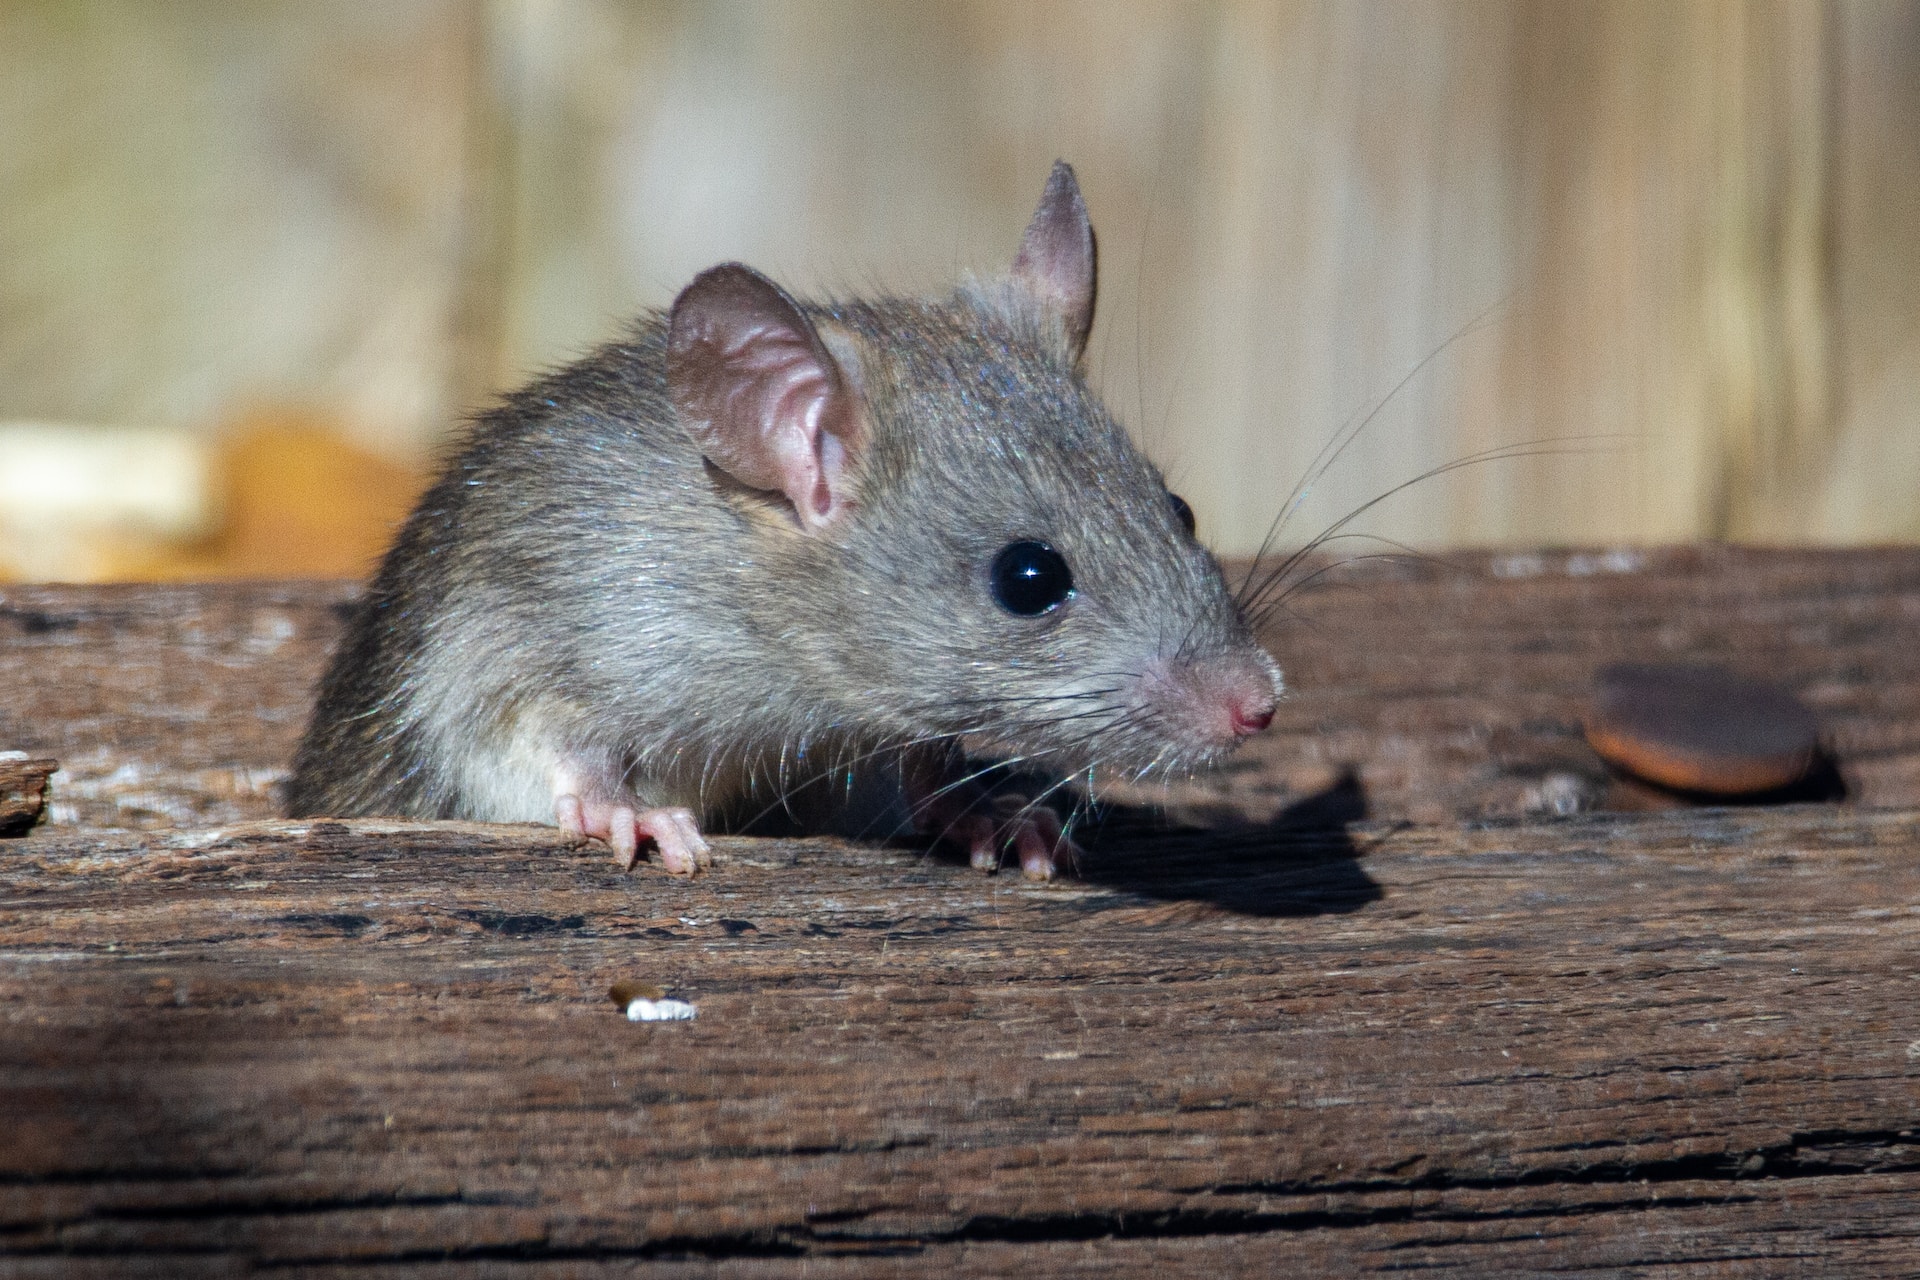 How to Safely Remove Mice From Your Attic - A Step-By-Step Guide